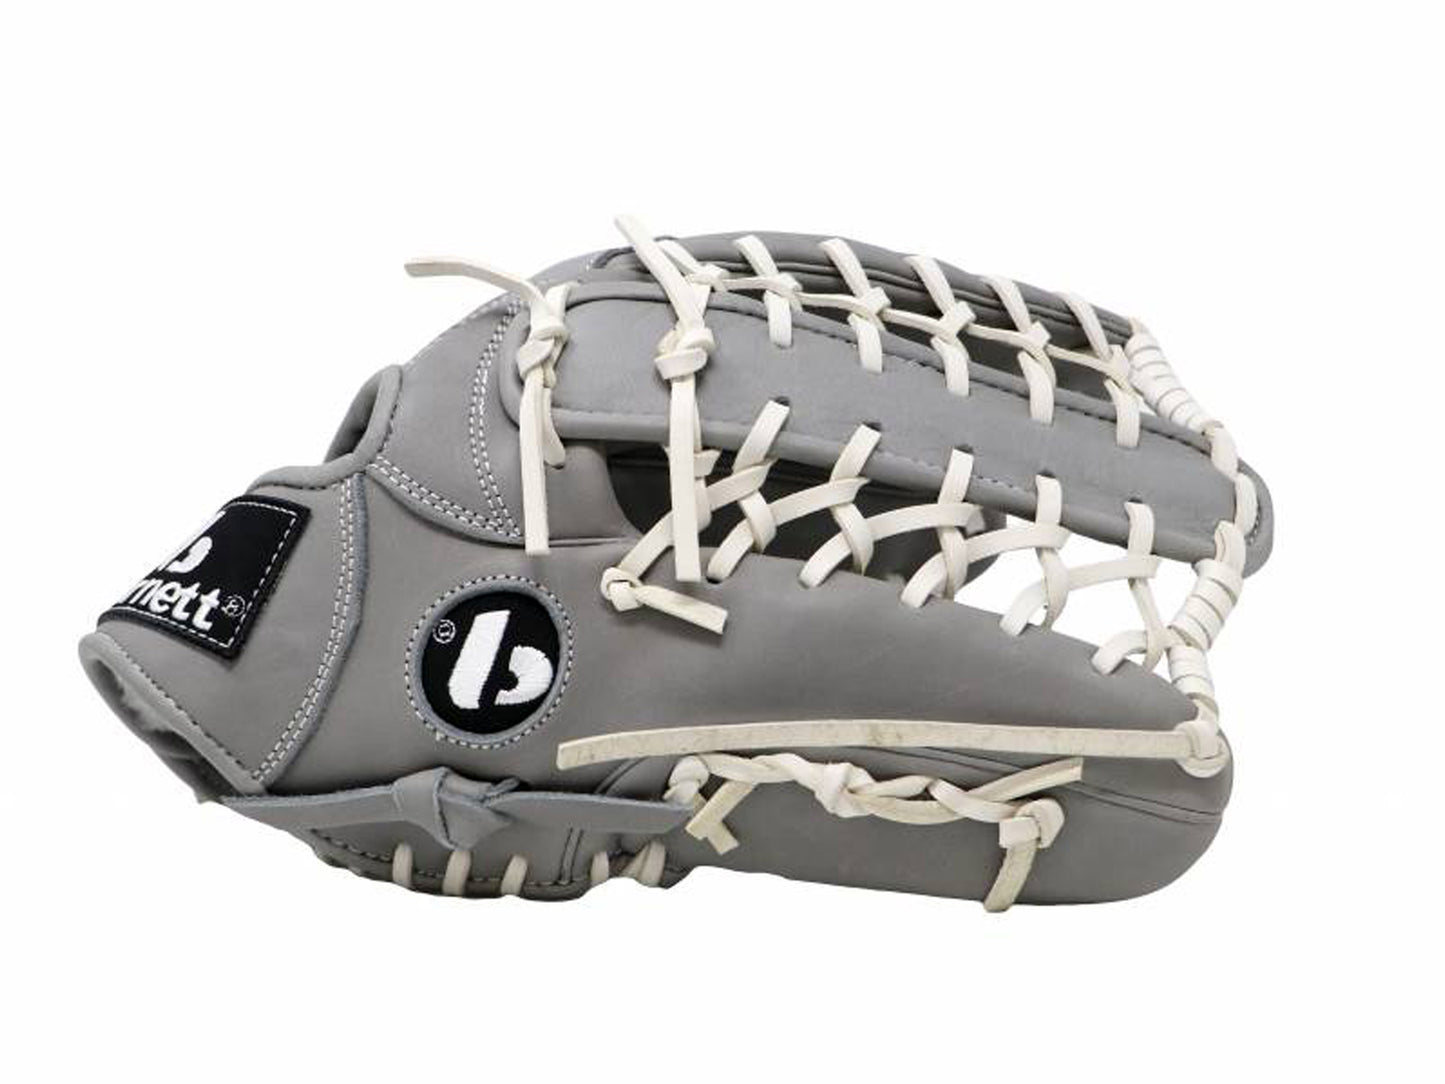 FL-127  high quality leather baseball glove, infield / outfield / pitcher, light grey